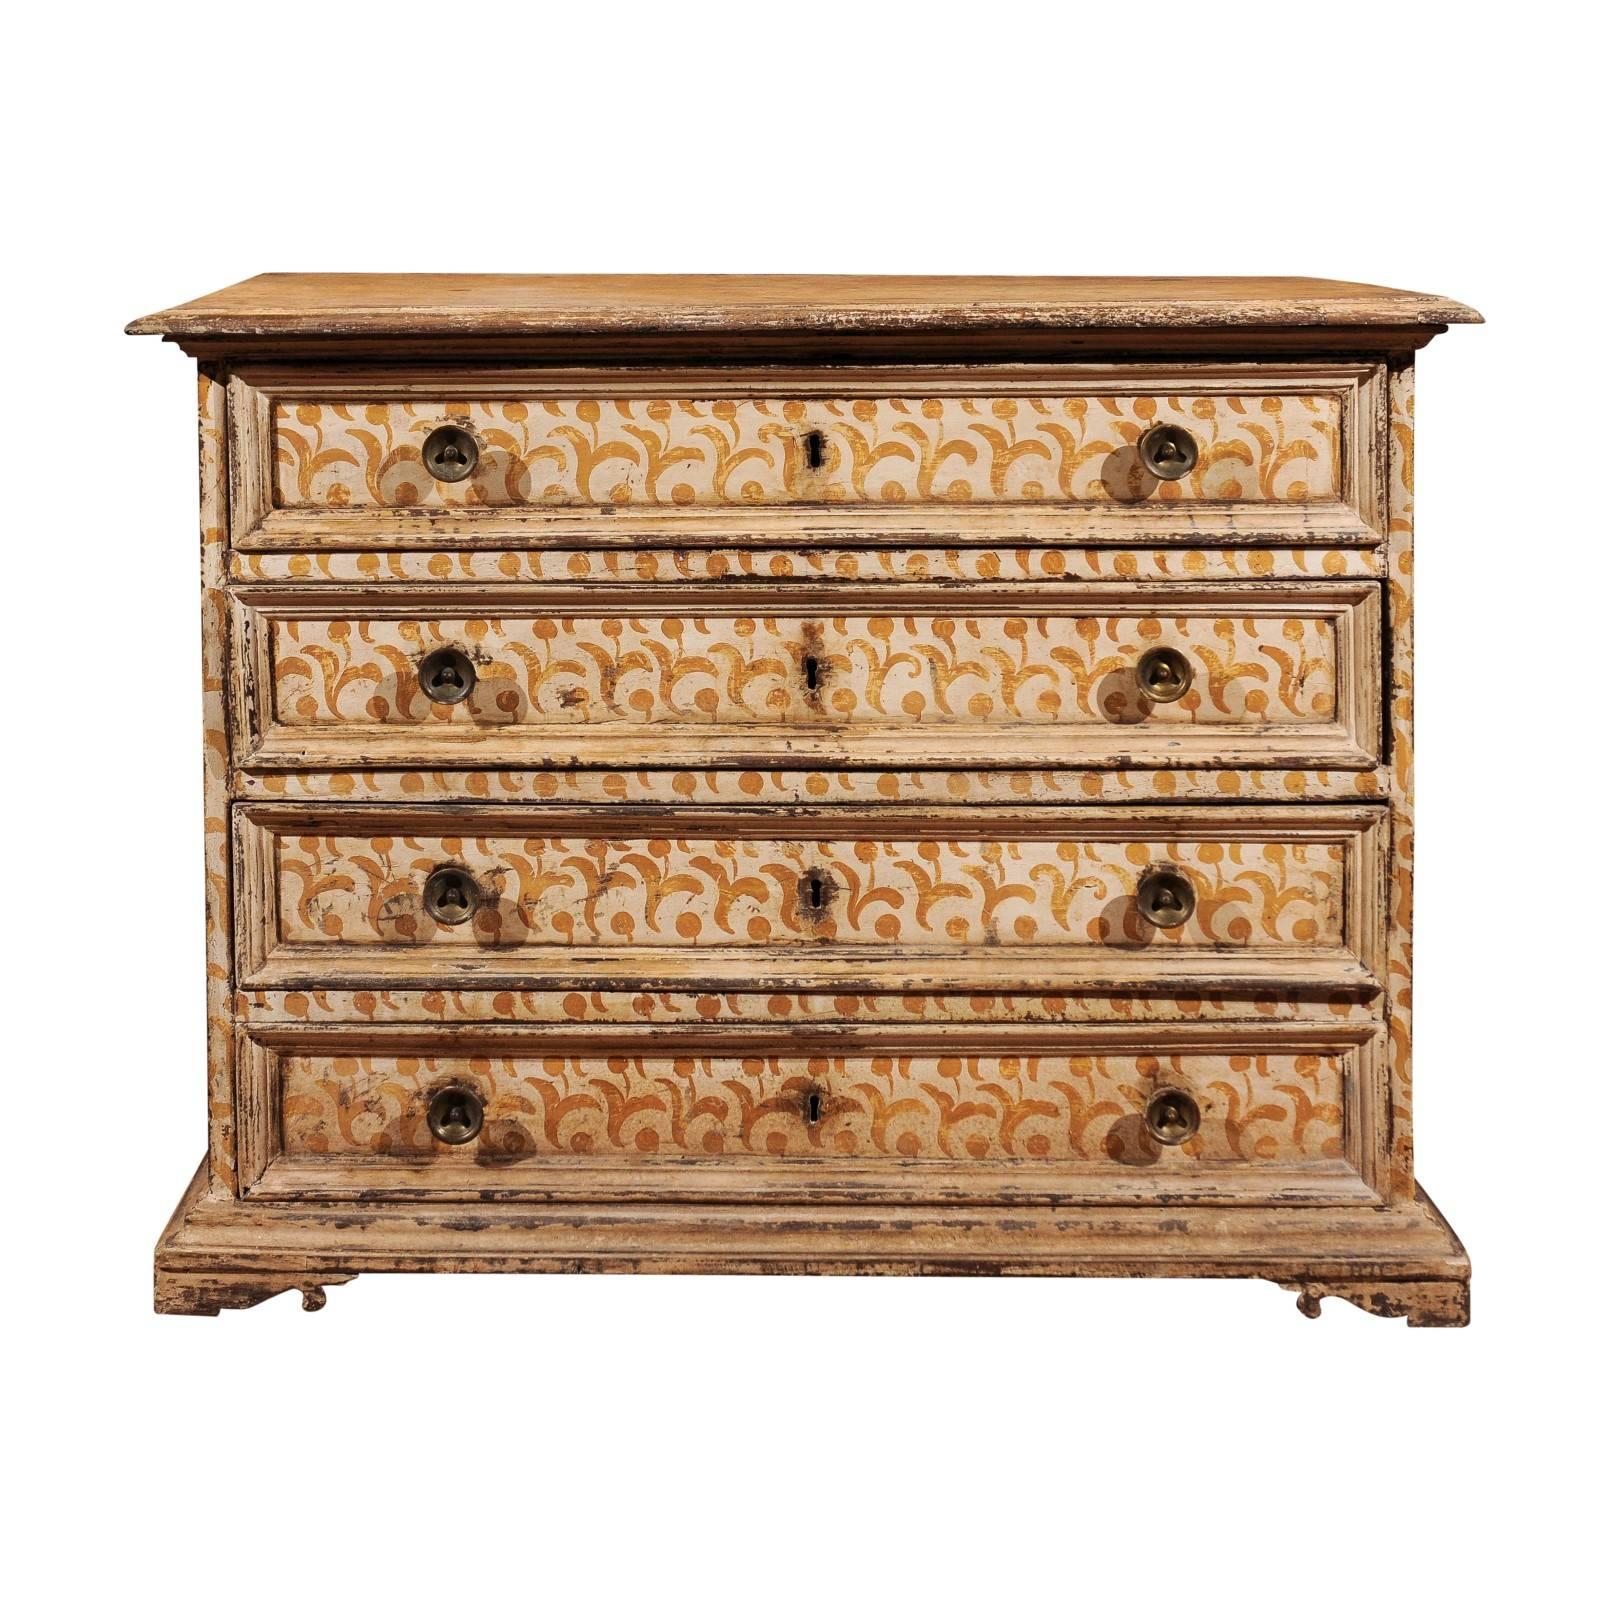 17th Century Florentine Tall Four-Drawer Commode with Painted Floral Motifs